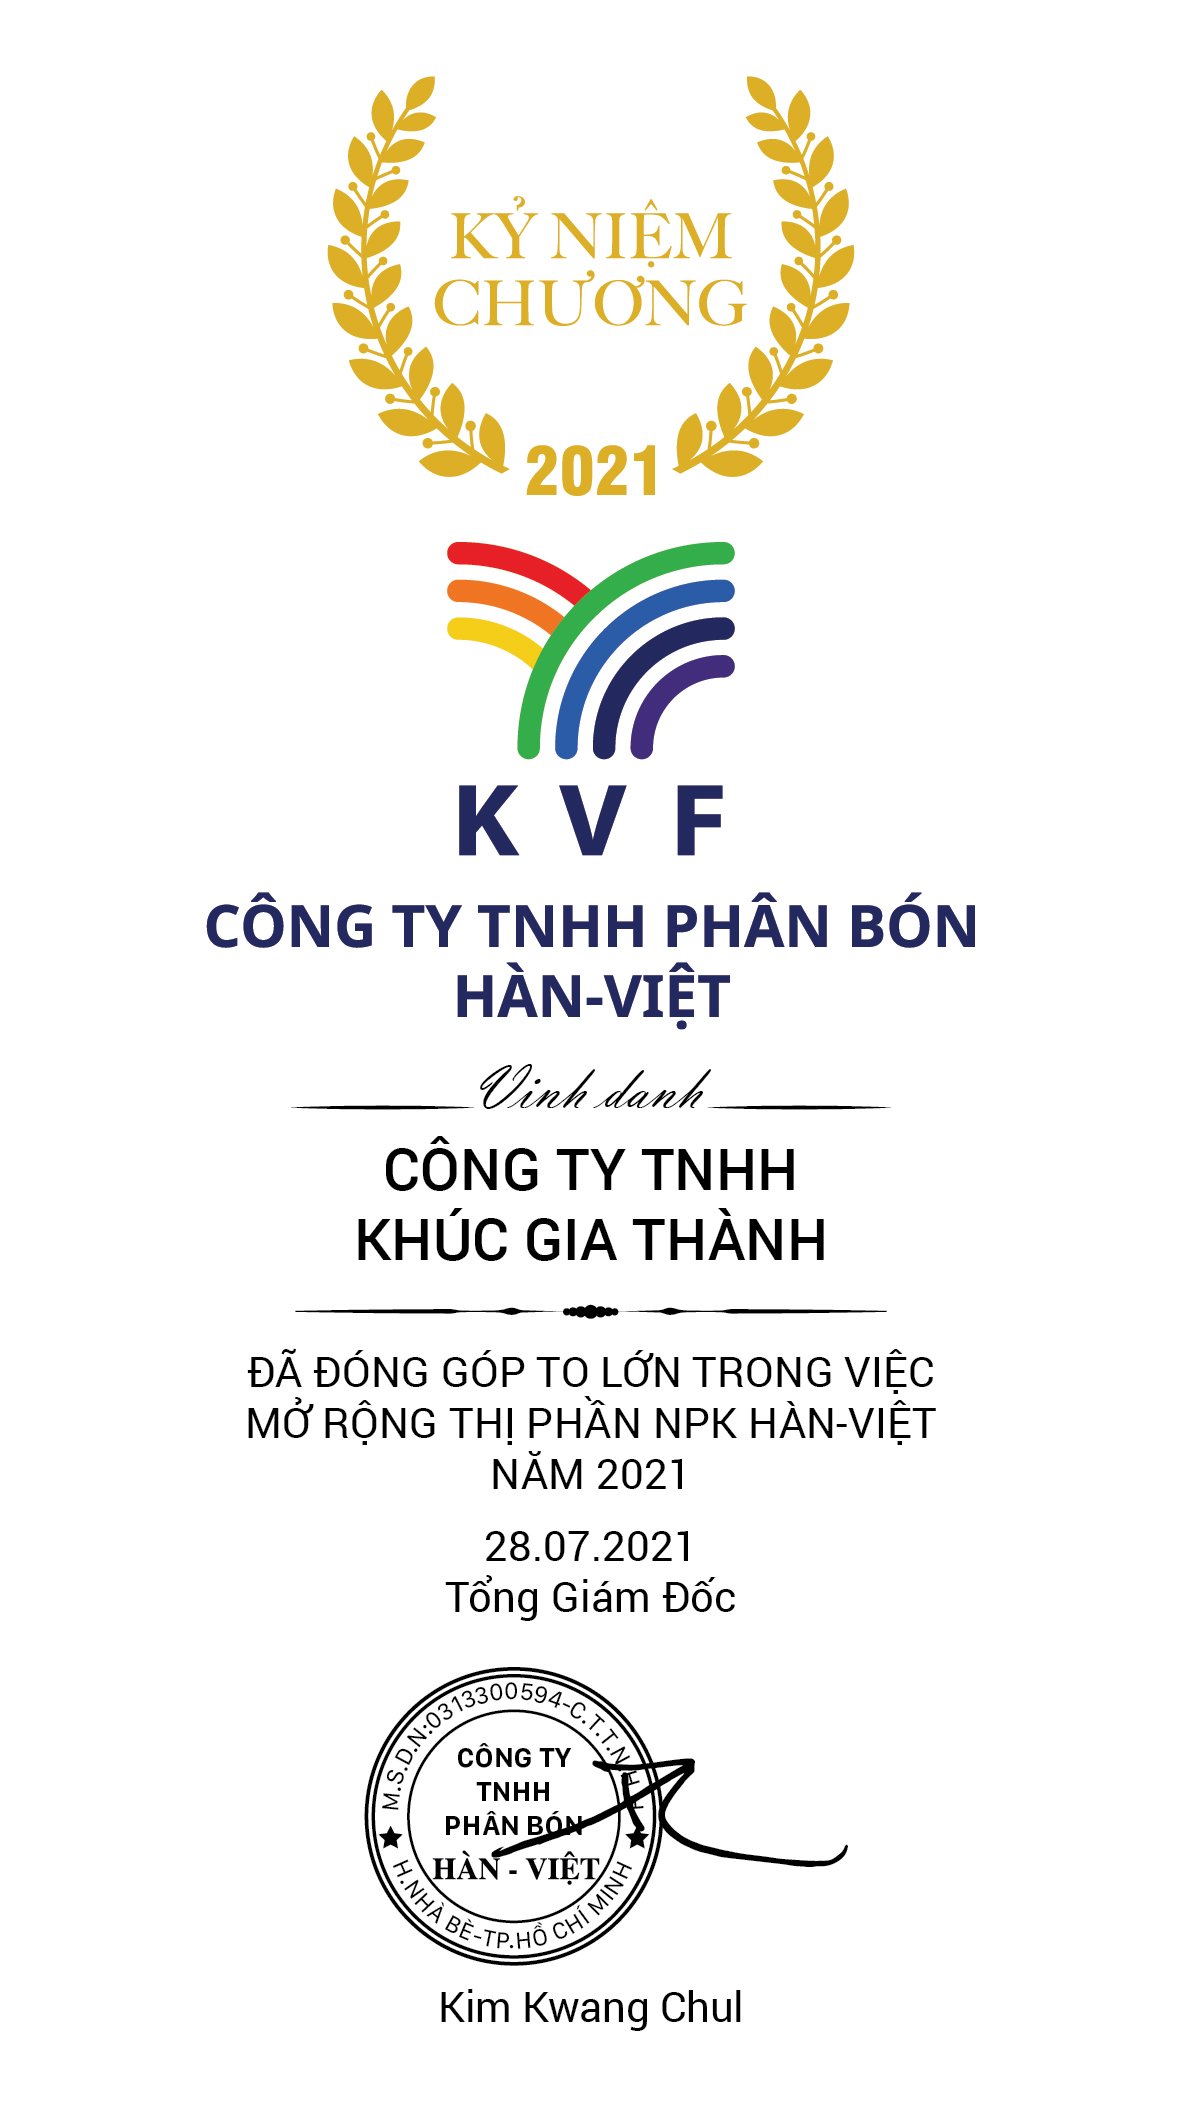 KVF would like to thank and congratulate NPP Khuc Gia Thanh Co., Ltd. (Lam Dong) for surpassing the accumulated sales milestone of 3,000 tons of Korean-Vietnamese NPK until July 28, 2021.